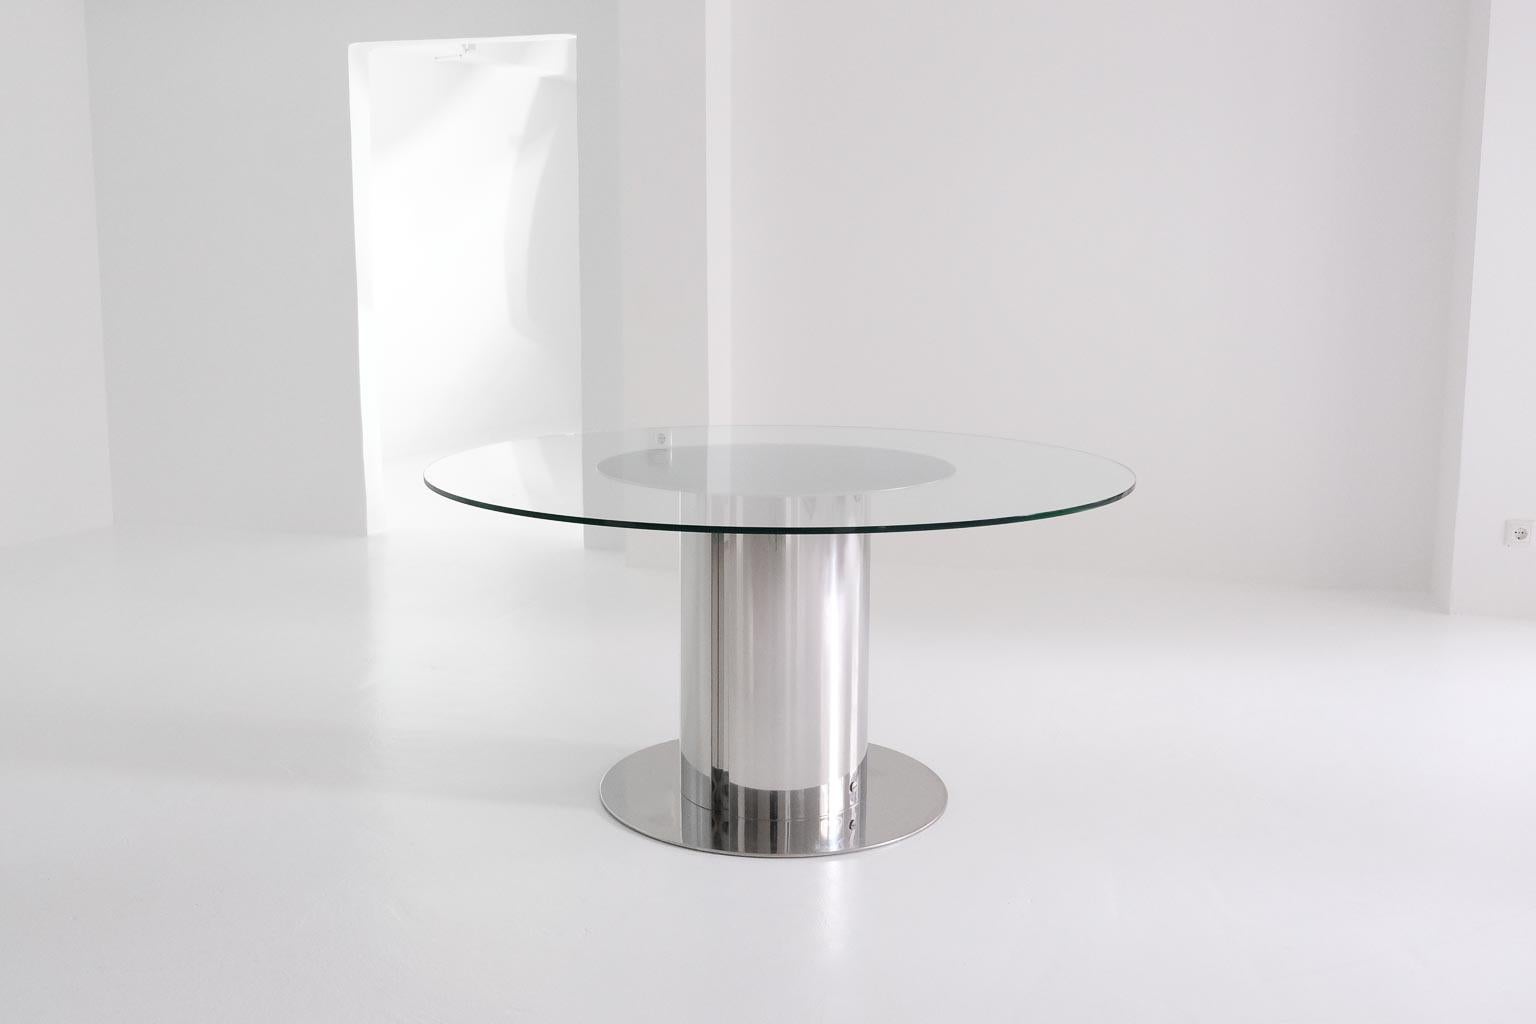 Italian cidonio dining table by antonia astori for cidue, italy, 1960s. For Sale